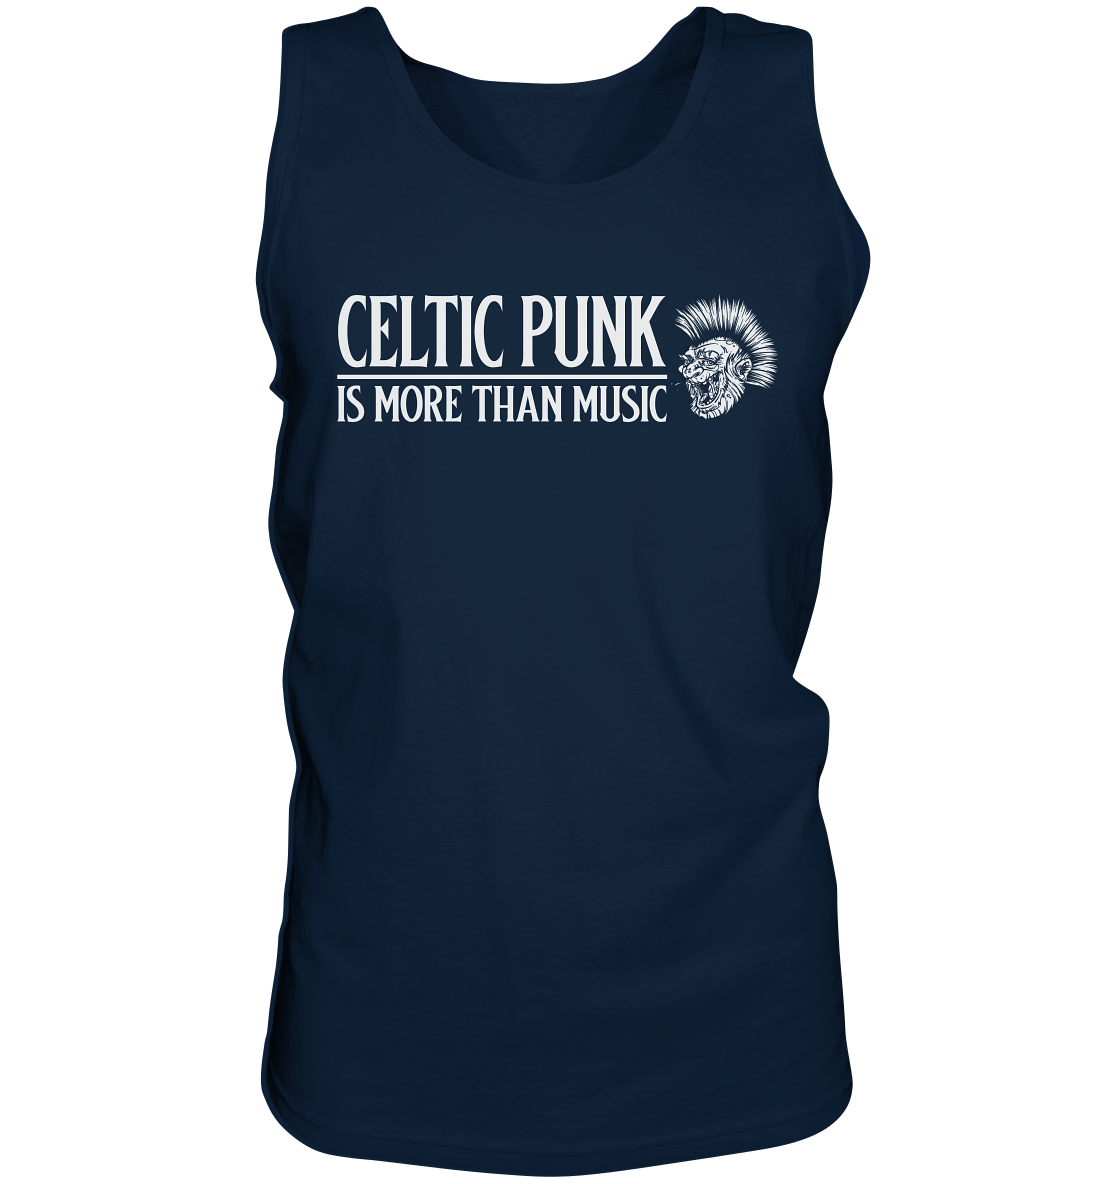 Celtic Punk "Is More Than Music" - Tank-Top